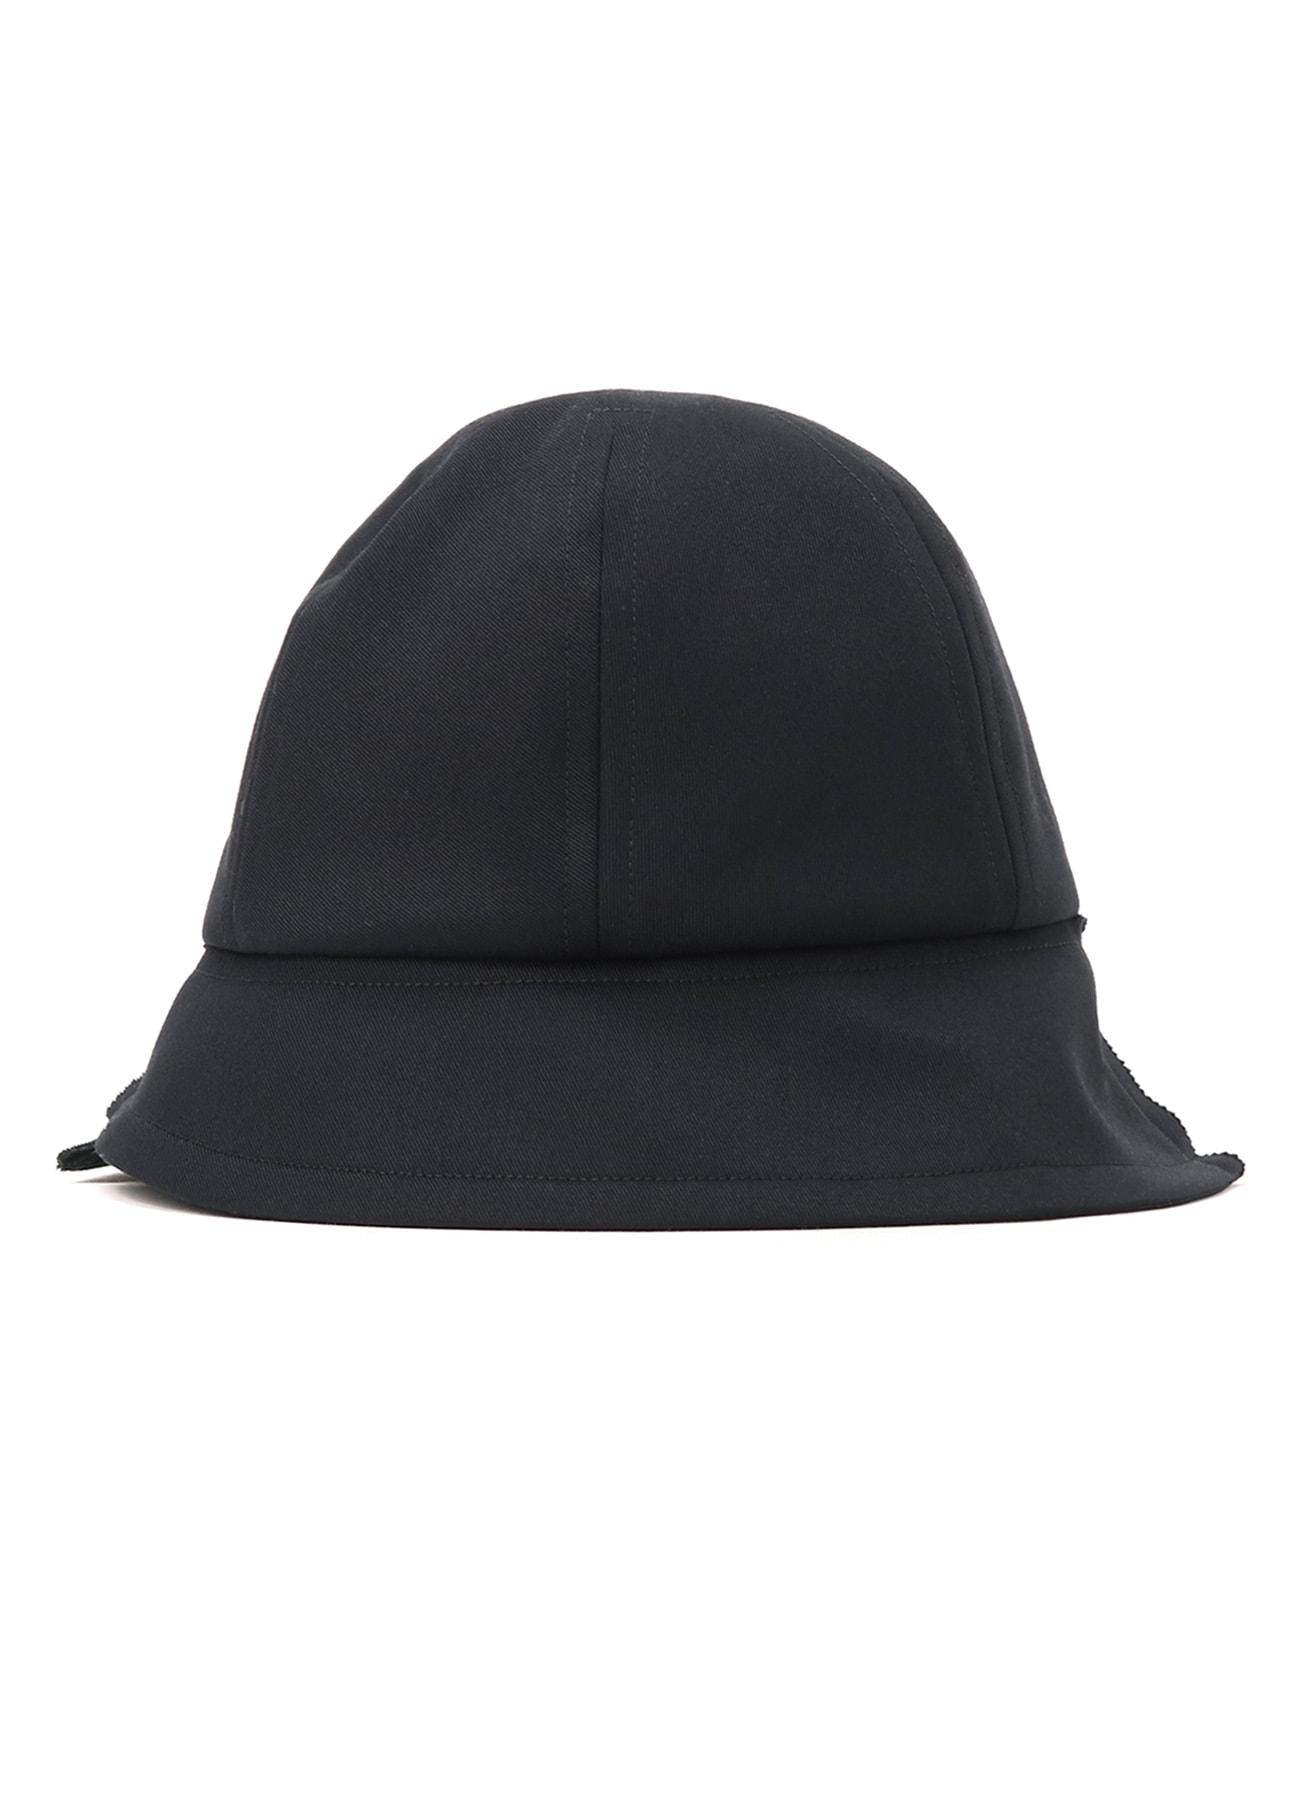 ishica COTTON TWILL TULIP BELL HAT(FREE SIZE BLACK): Ground Y｜THE 